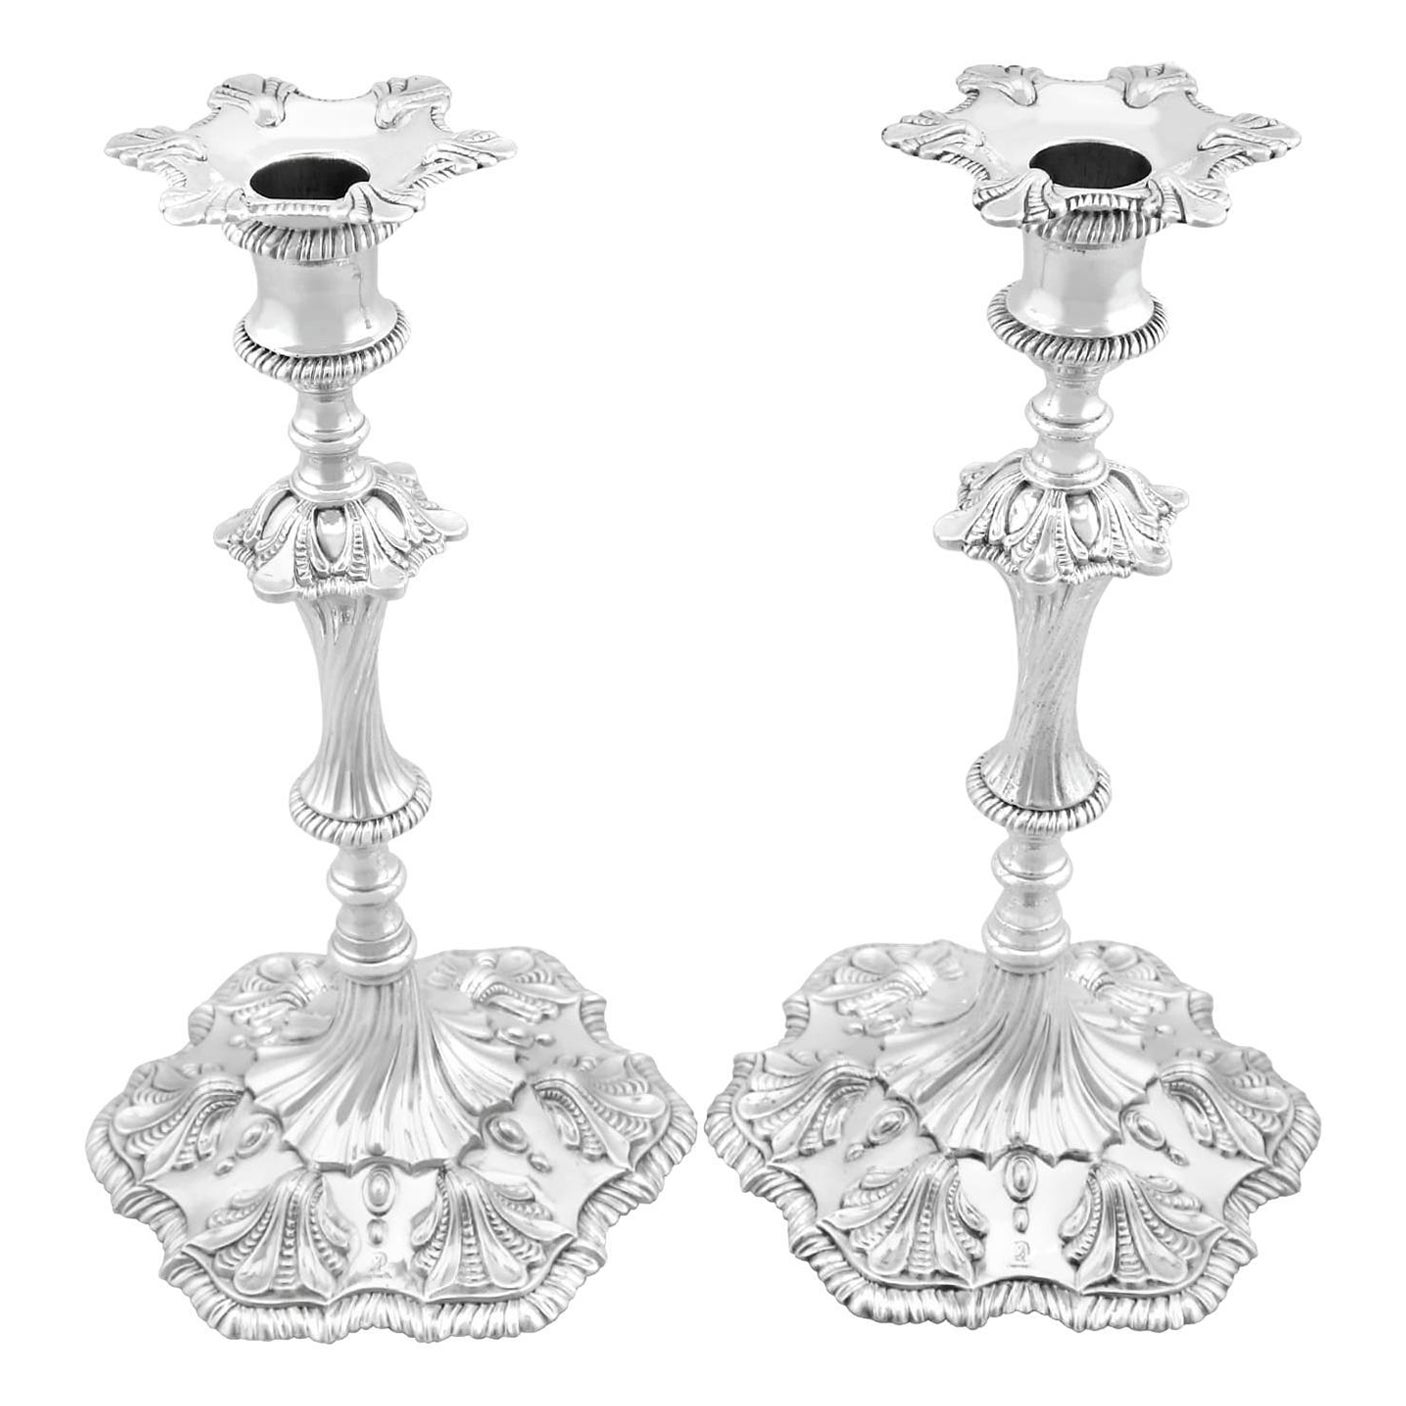 Antique Sterling Silver Candle Holders